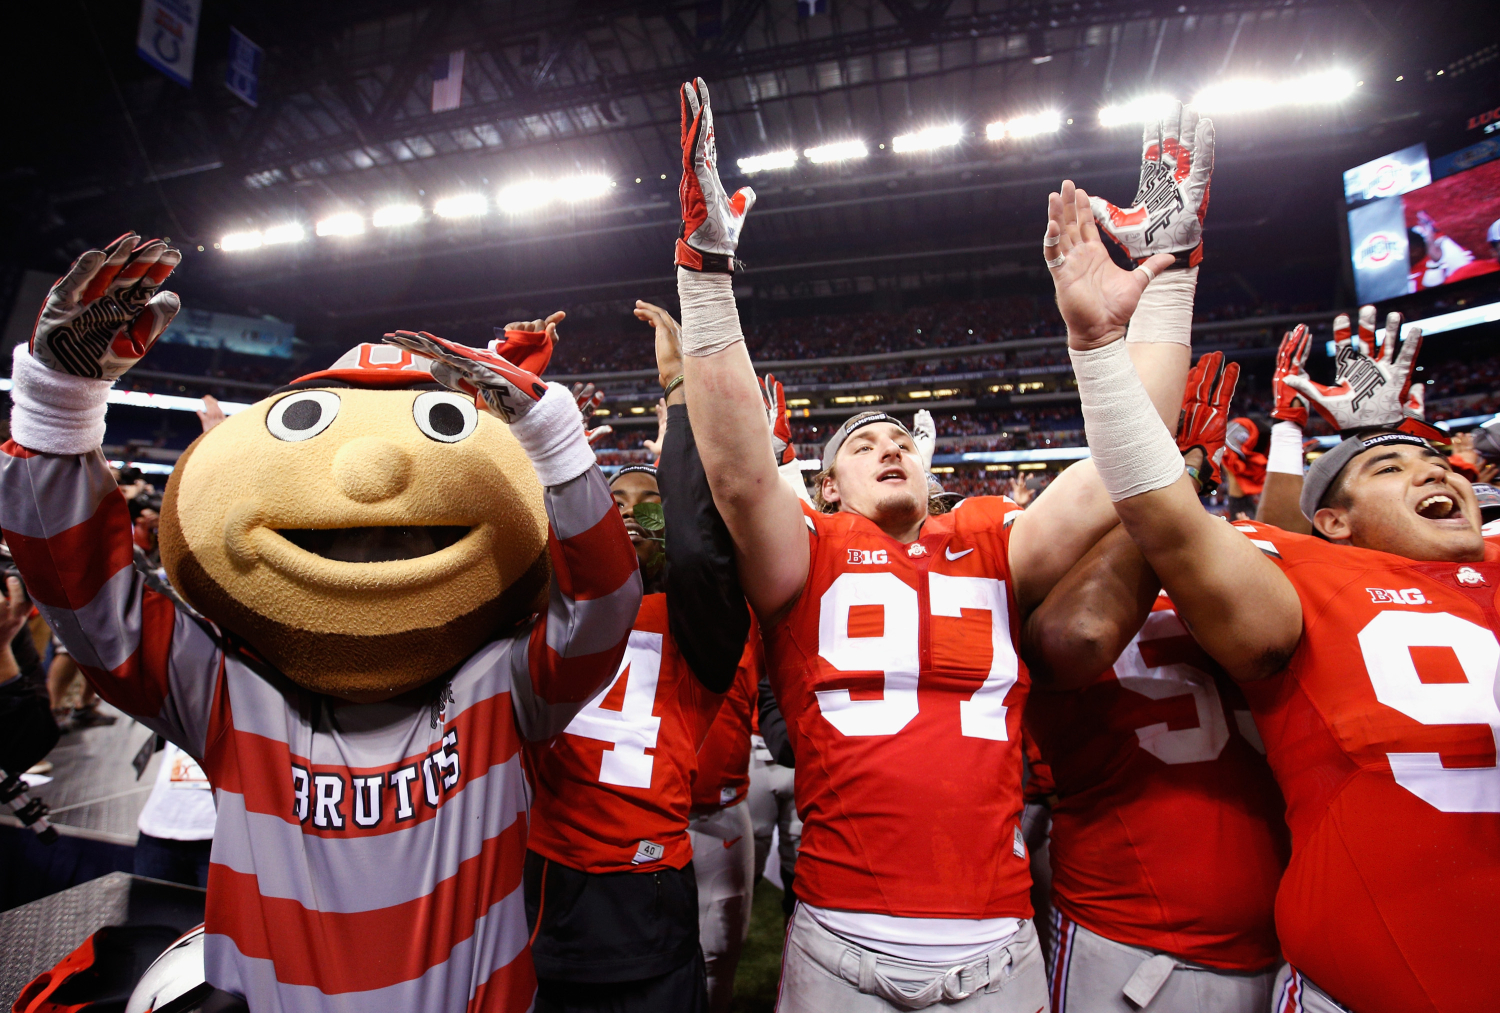 Why Is Ohio State’s Football Team Called the Buckeyes?